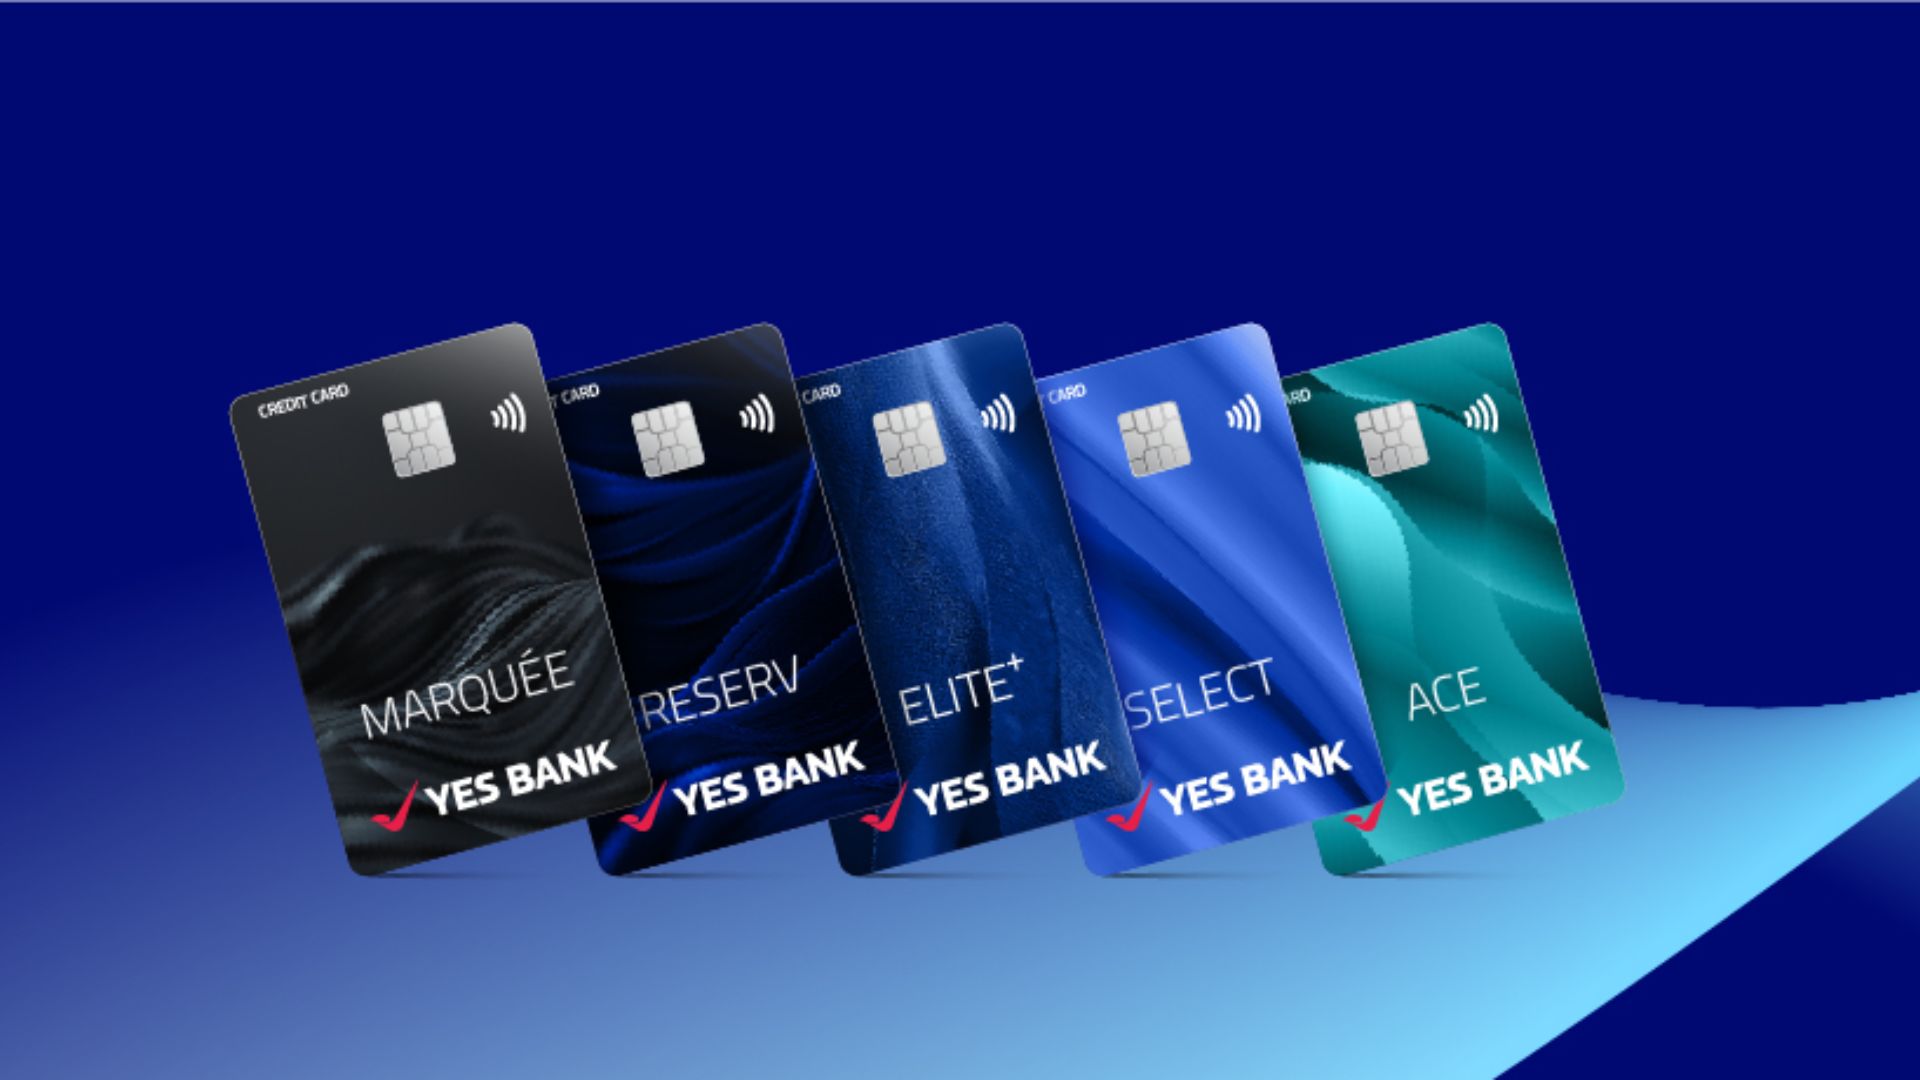 Introducing MARQUEE: Yes Bank’s exclusive range of credit cards.